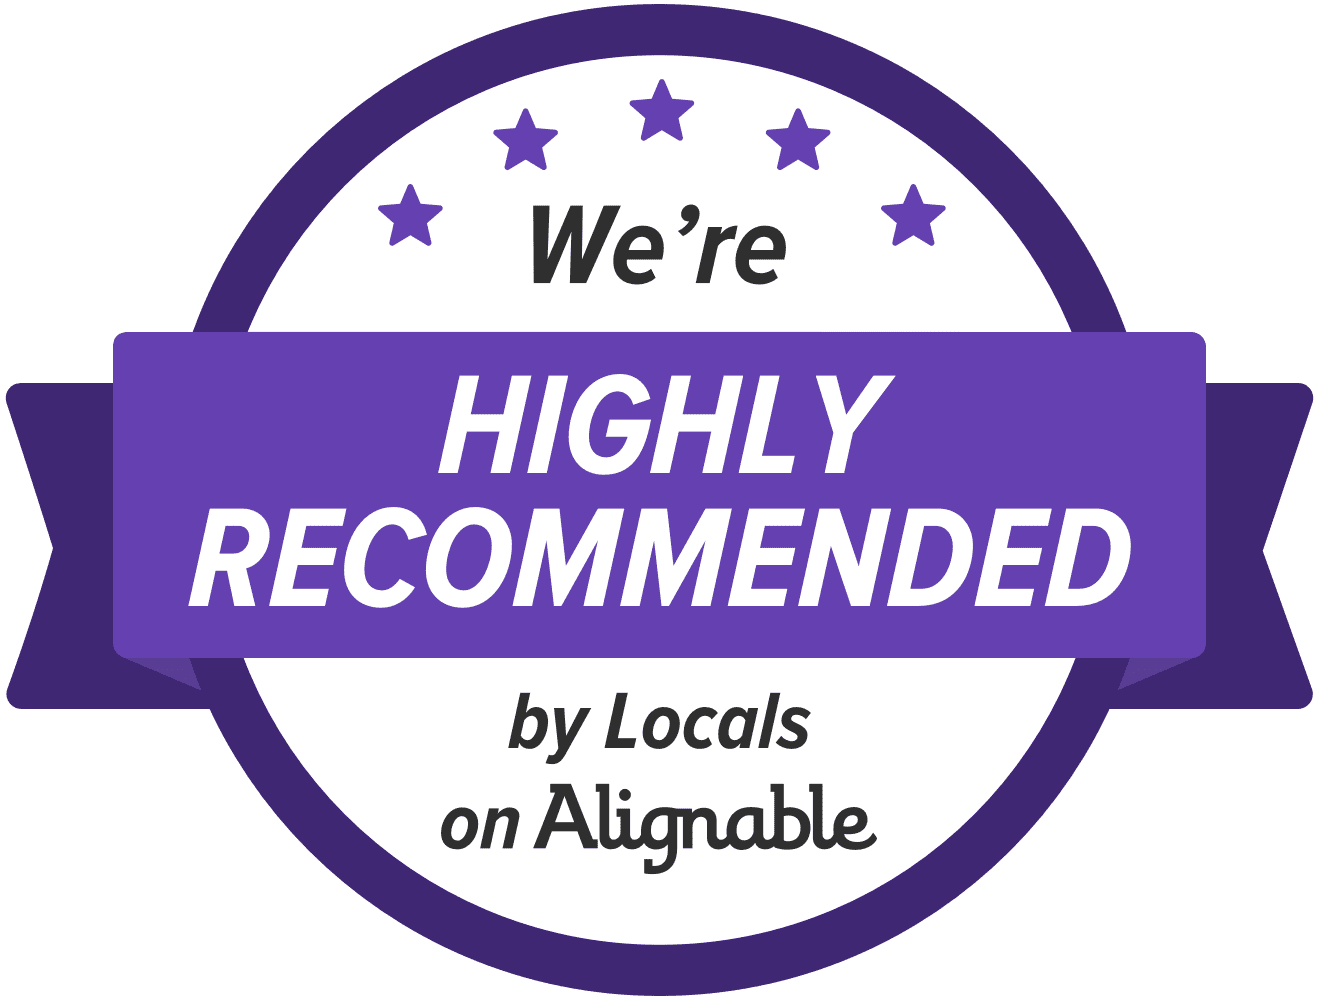 We're highly recommended by locals on alligable.